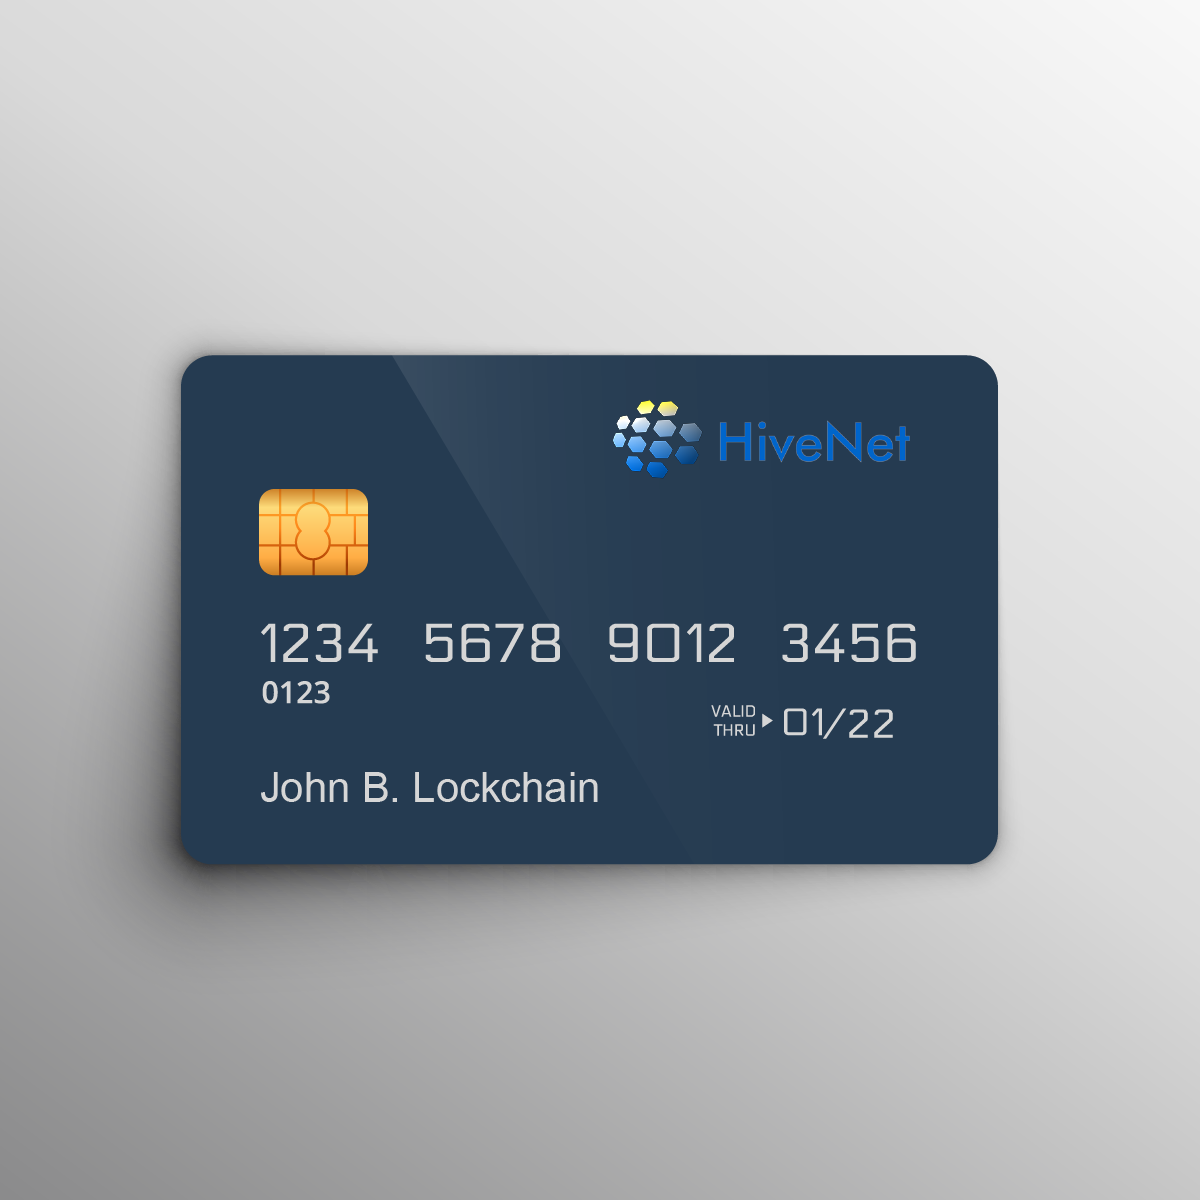 Part 2 of 2: Crypto Debit Card Payments and the HiveNet ...